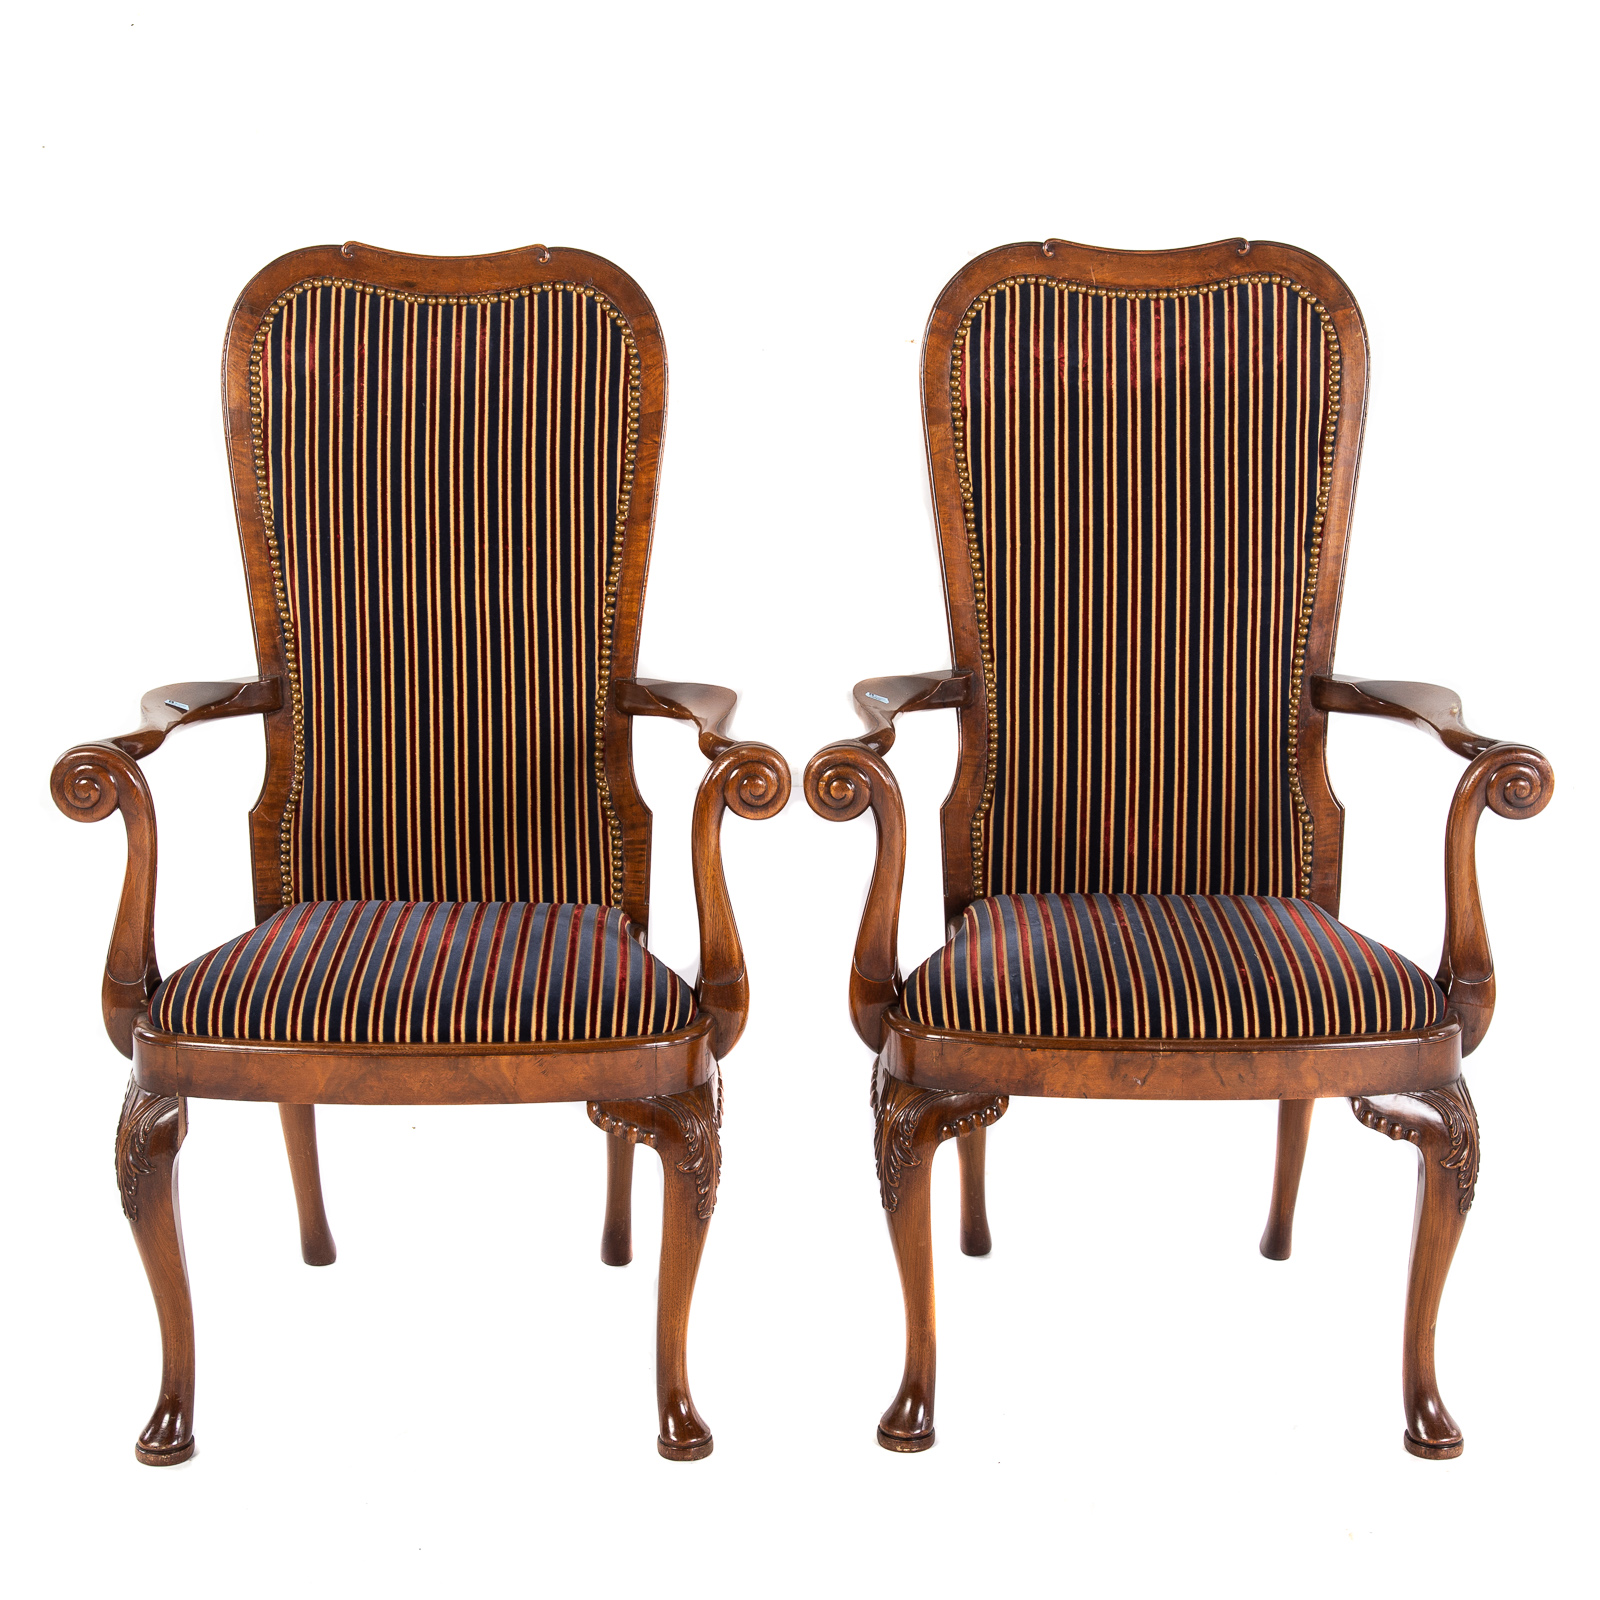 A PAIR OF GEORGE II STYLE ARM CHAIRS